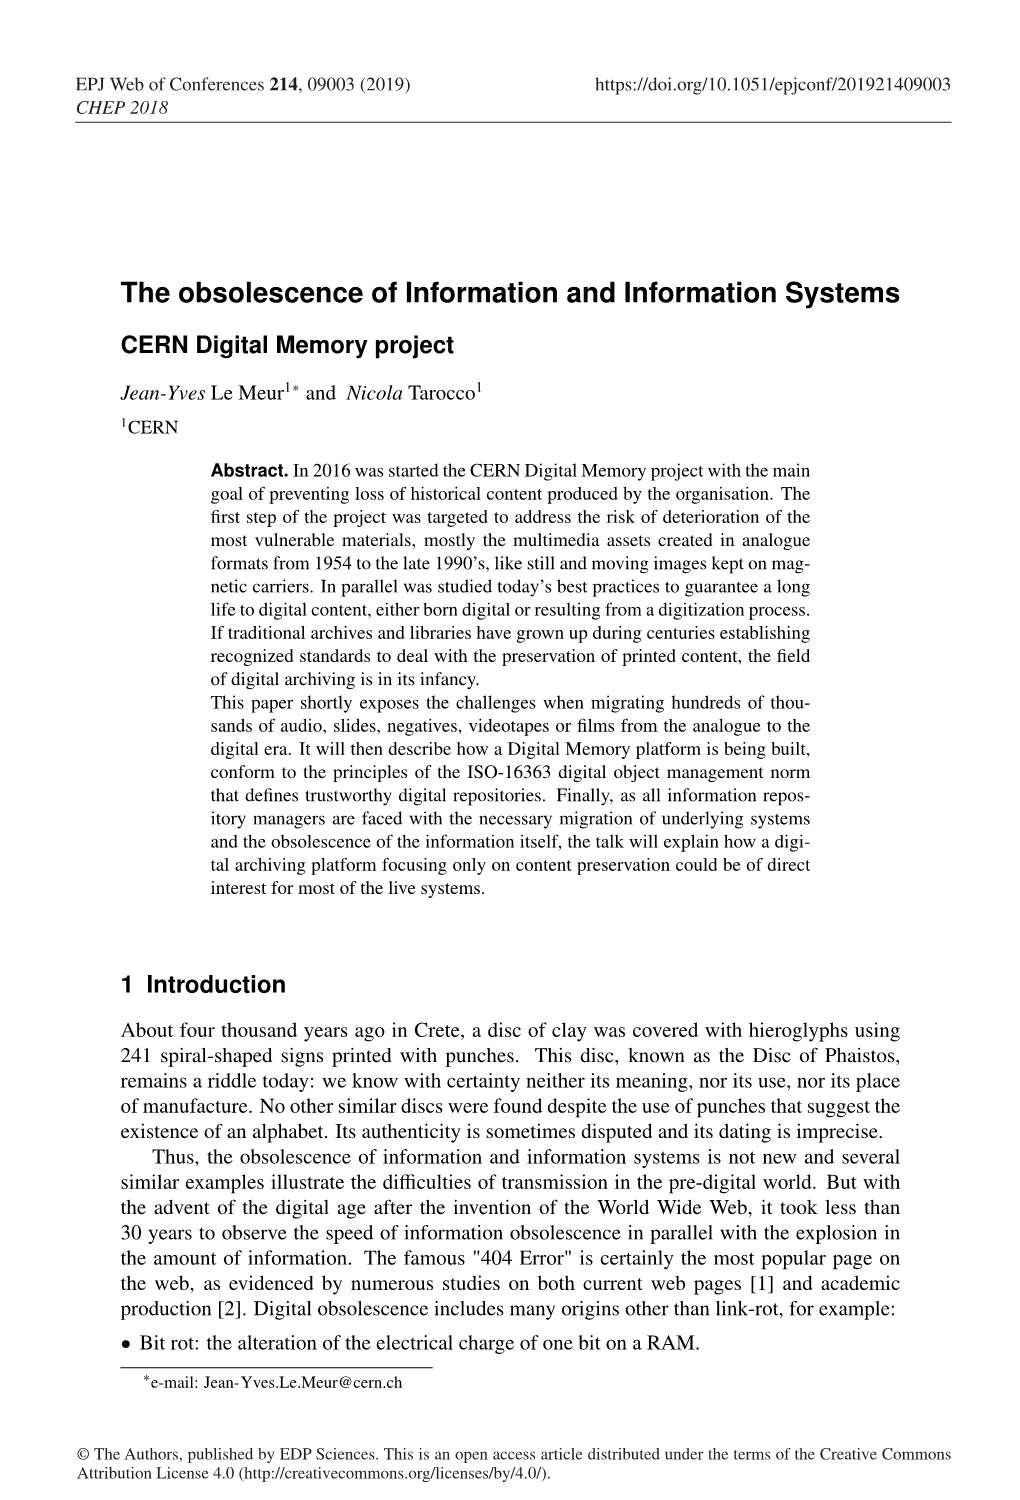 The Obsolescence of Information and Information Systems CERN Digital